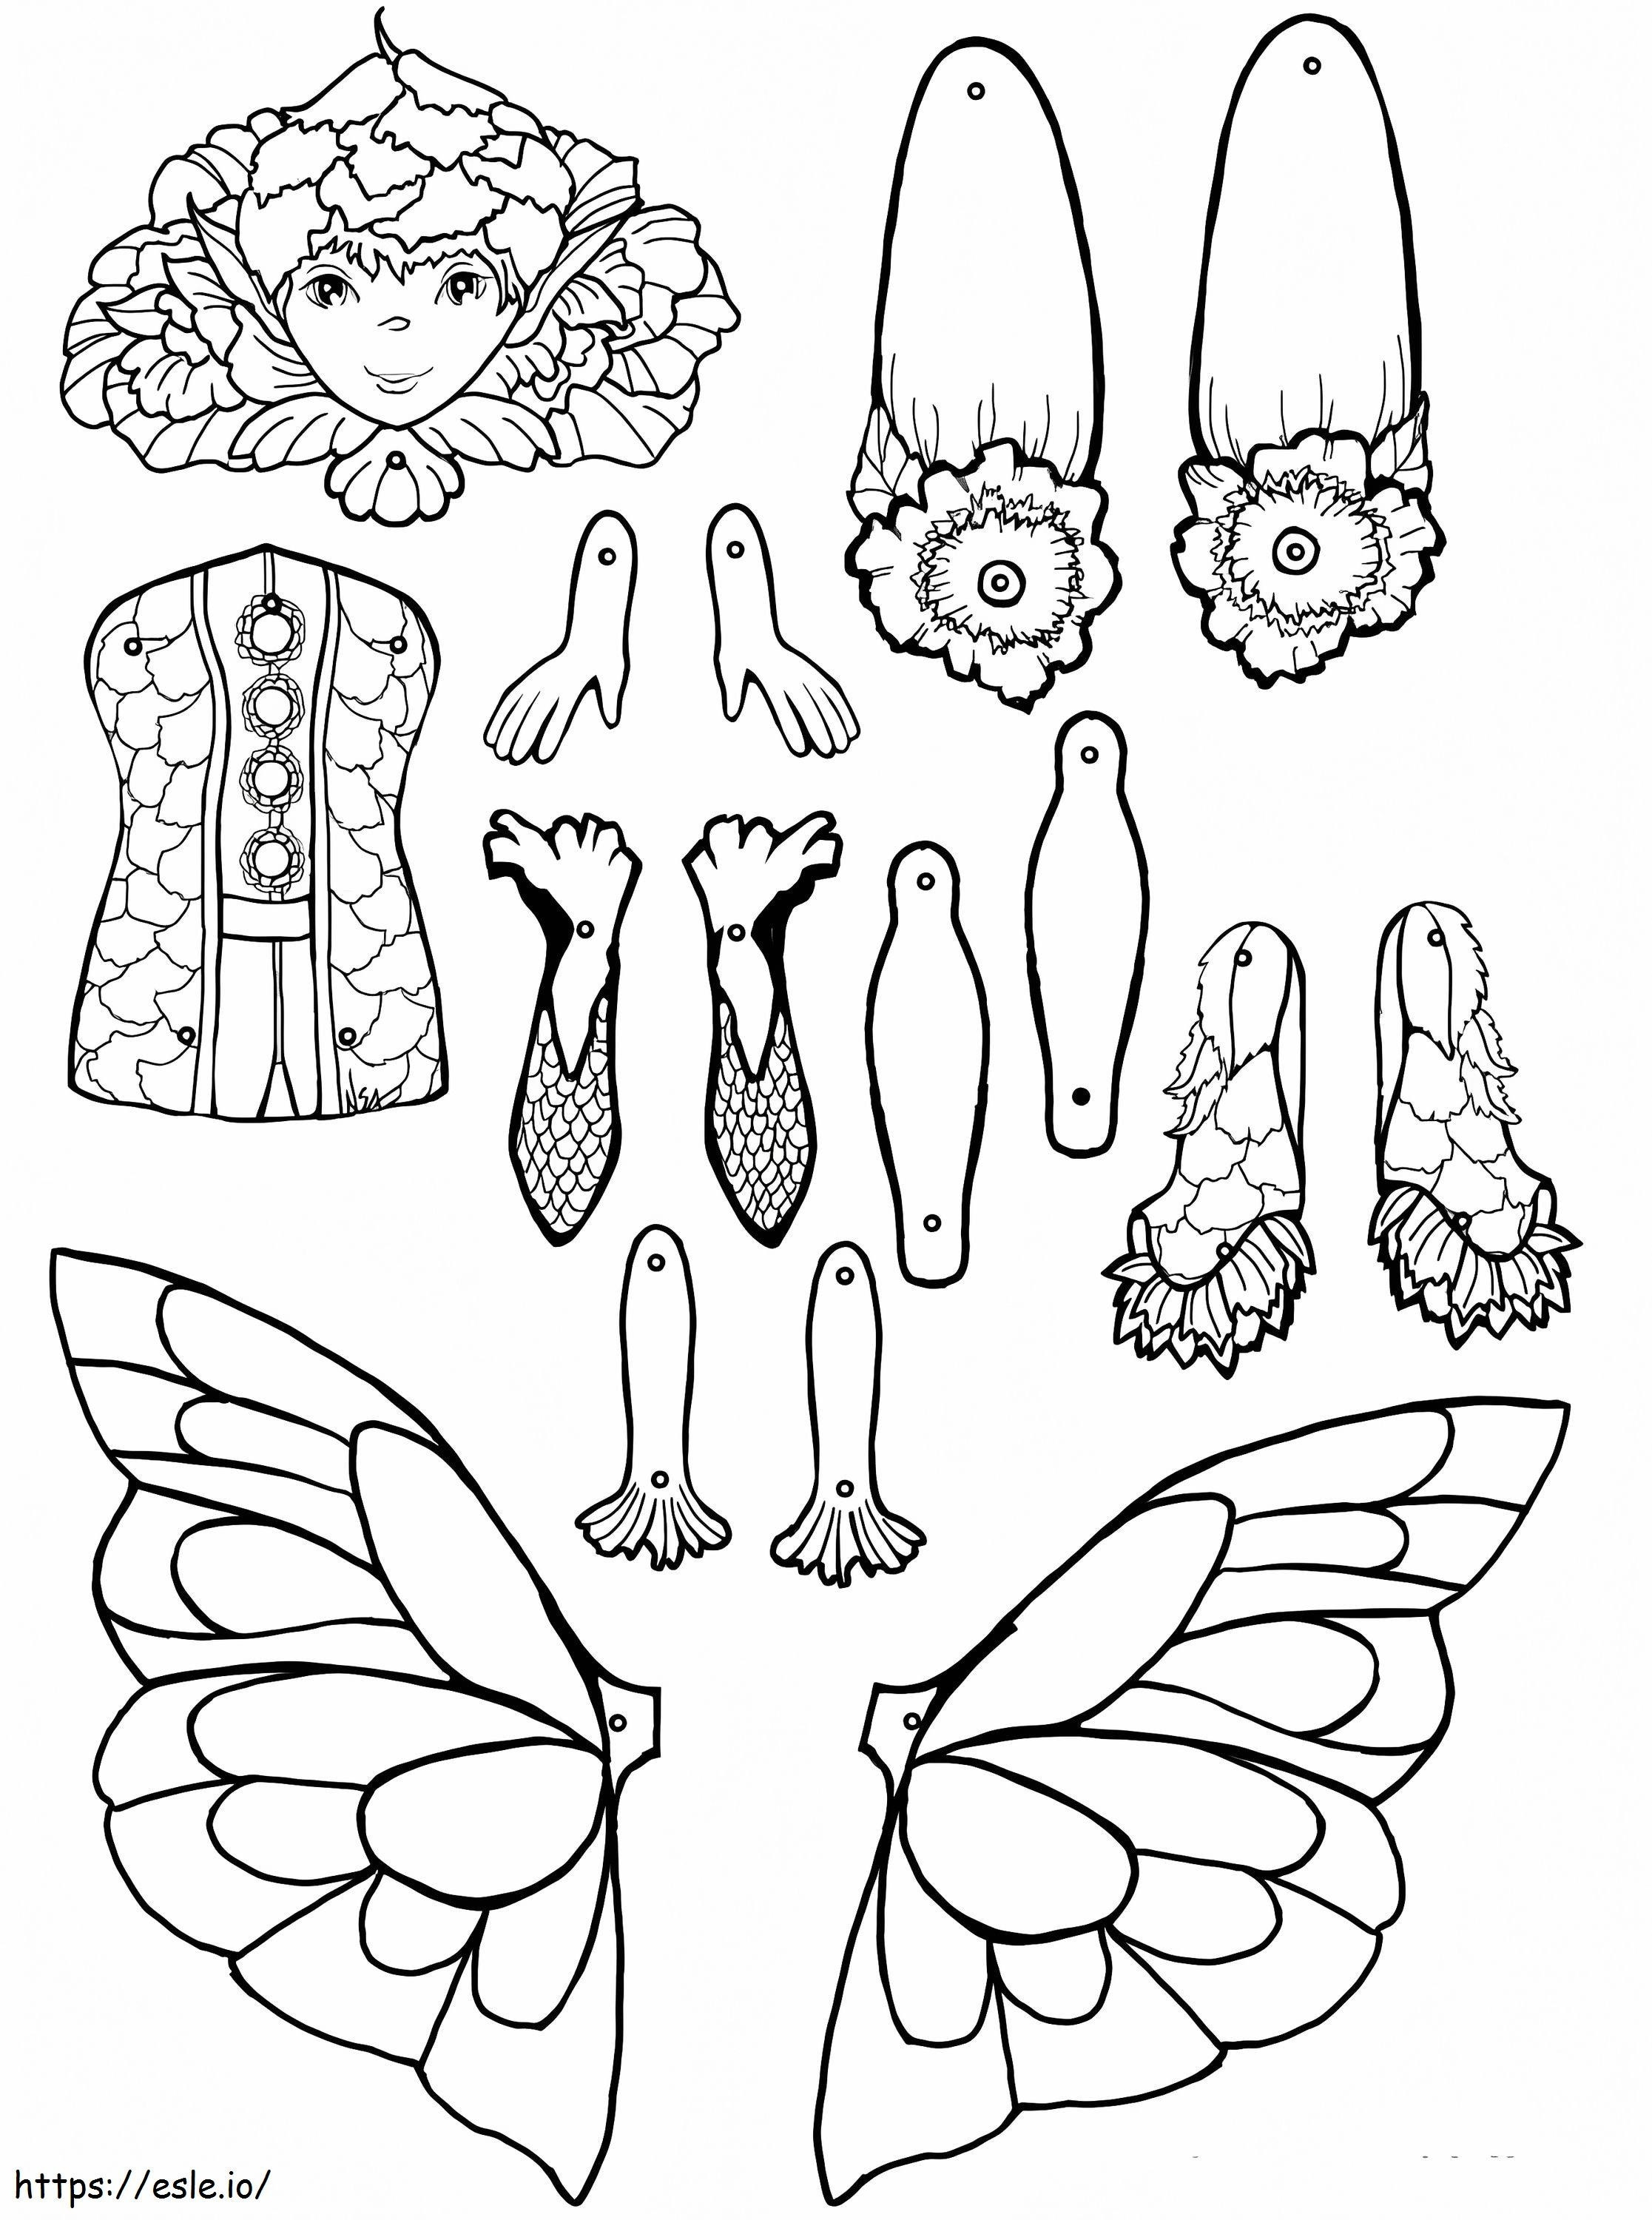 Fairy Puppet coloring page